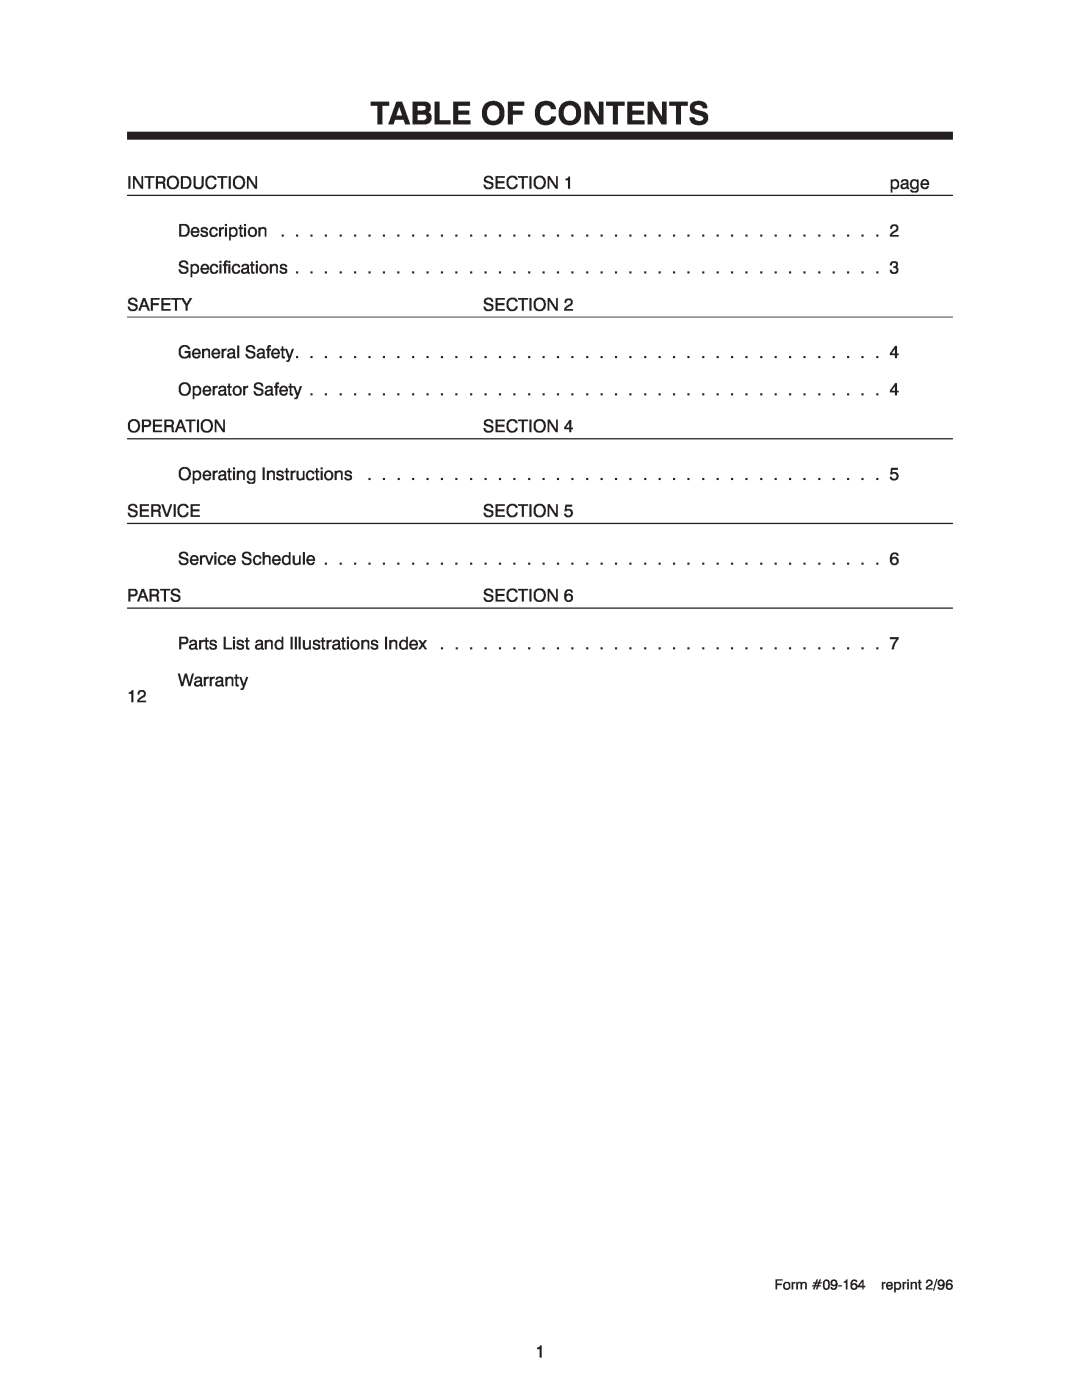 Steiner Turf LS340 manual Table Of Contents 